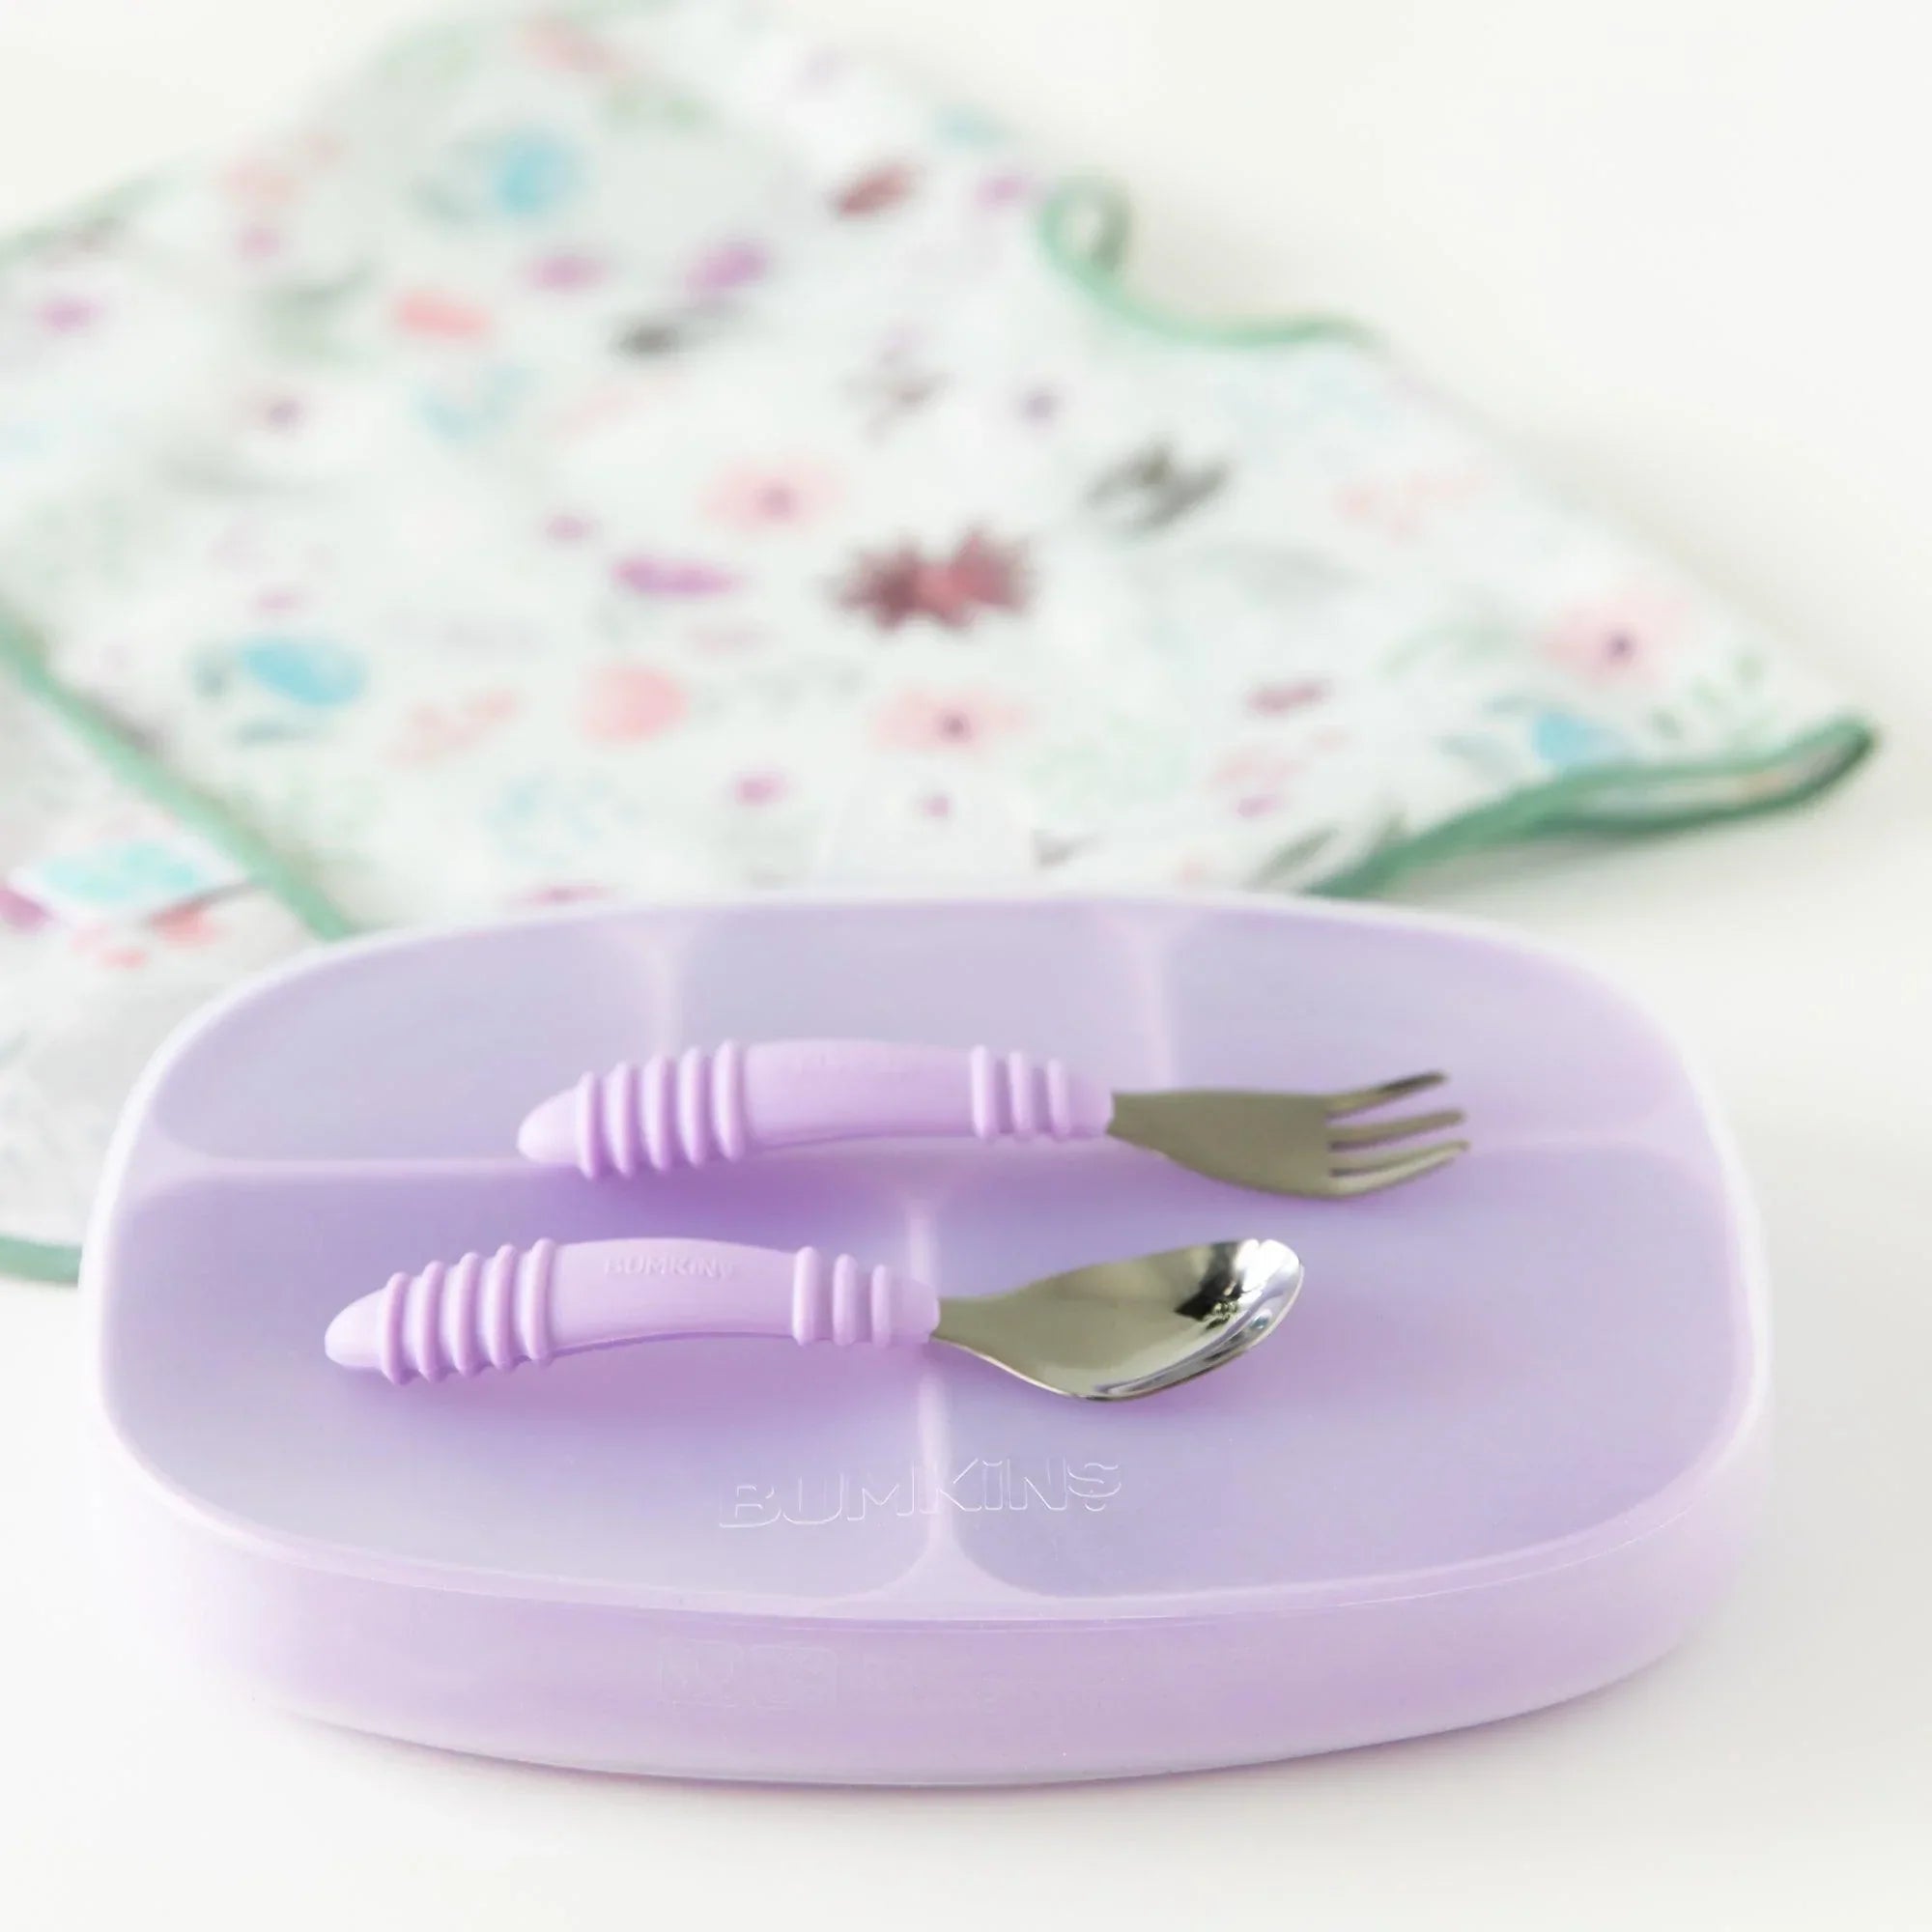 Silicone Grip Dish with Lid (5 Section): Lavender - Bumkins